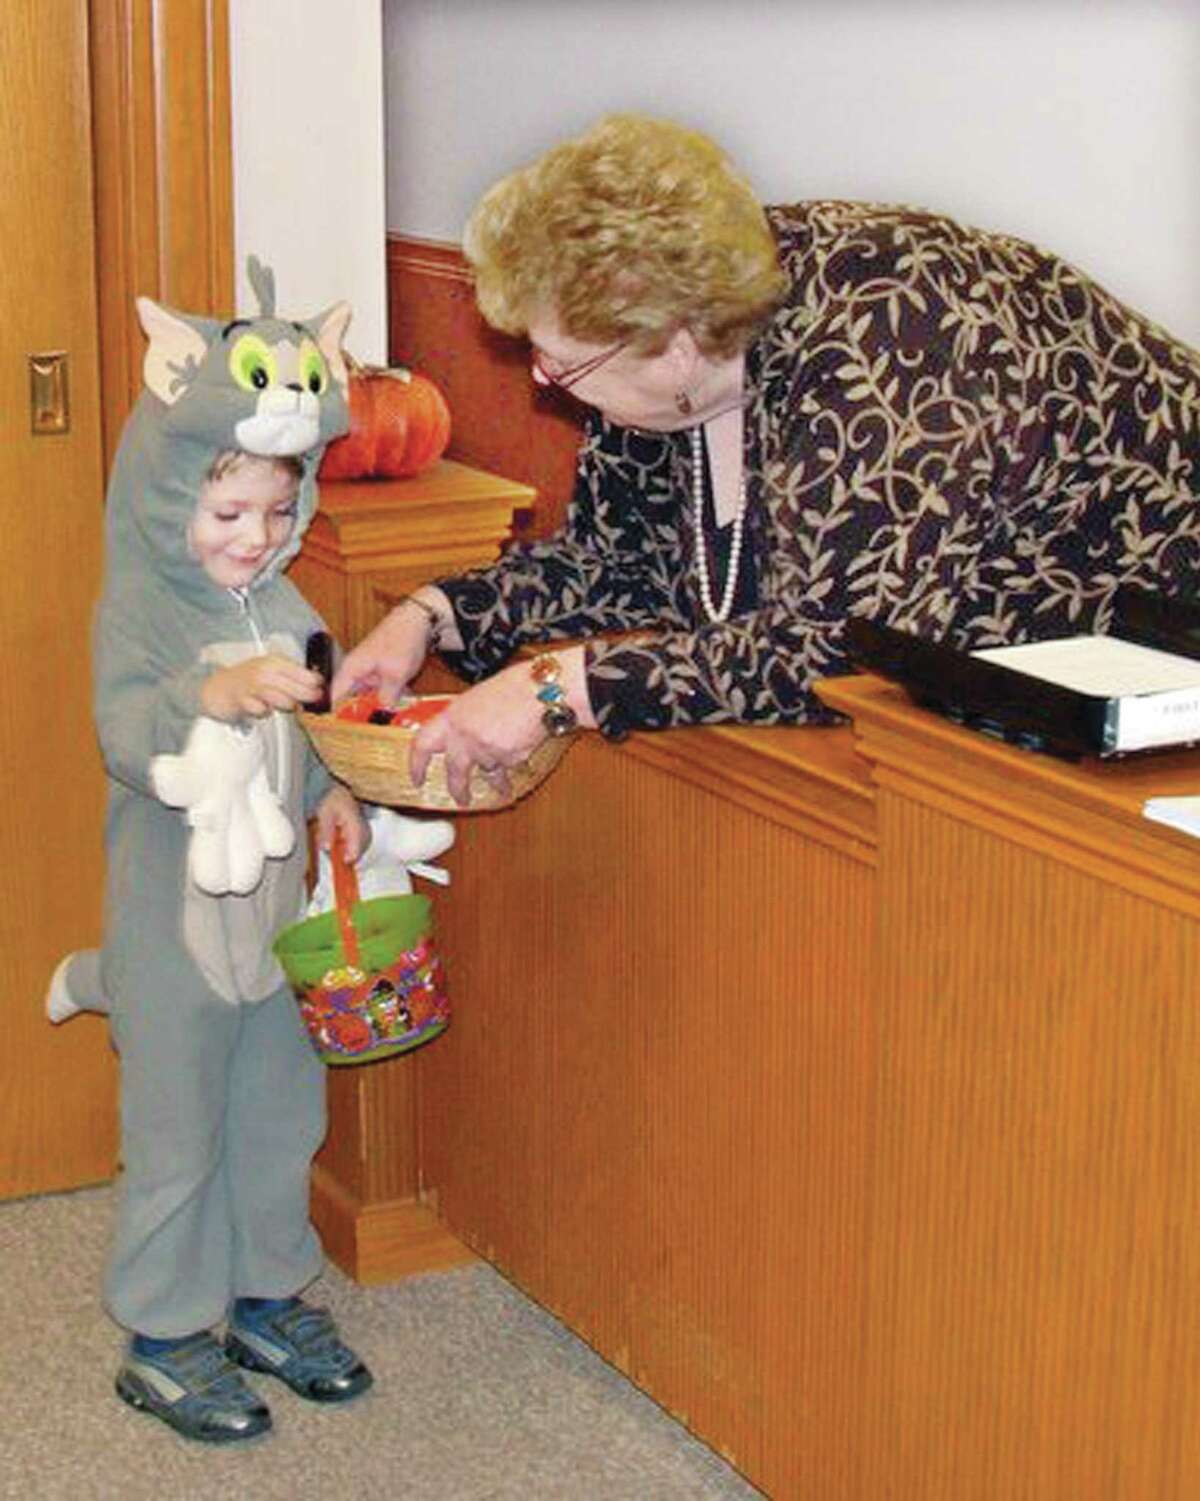 Photo courtesy Marcia Pendleton-Sacco 10.25.10 Three year old, Liam Walsh, of Cromwell gets candy from Re Matus, the secretary for Cromwell's First Selectman at Town Hall Pre-Halloween' Playtime, Party and Trick or Treat sponsored by the Cromwell Youth Services.